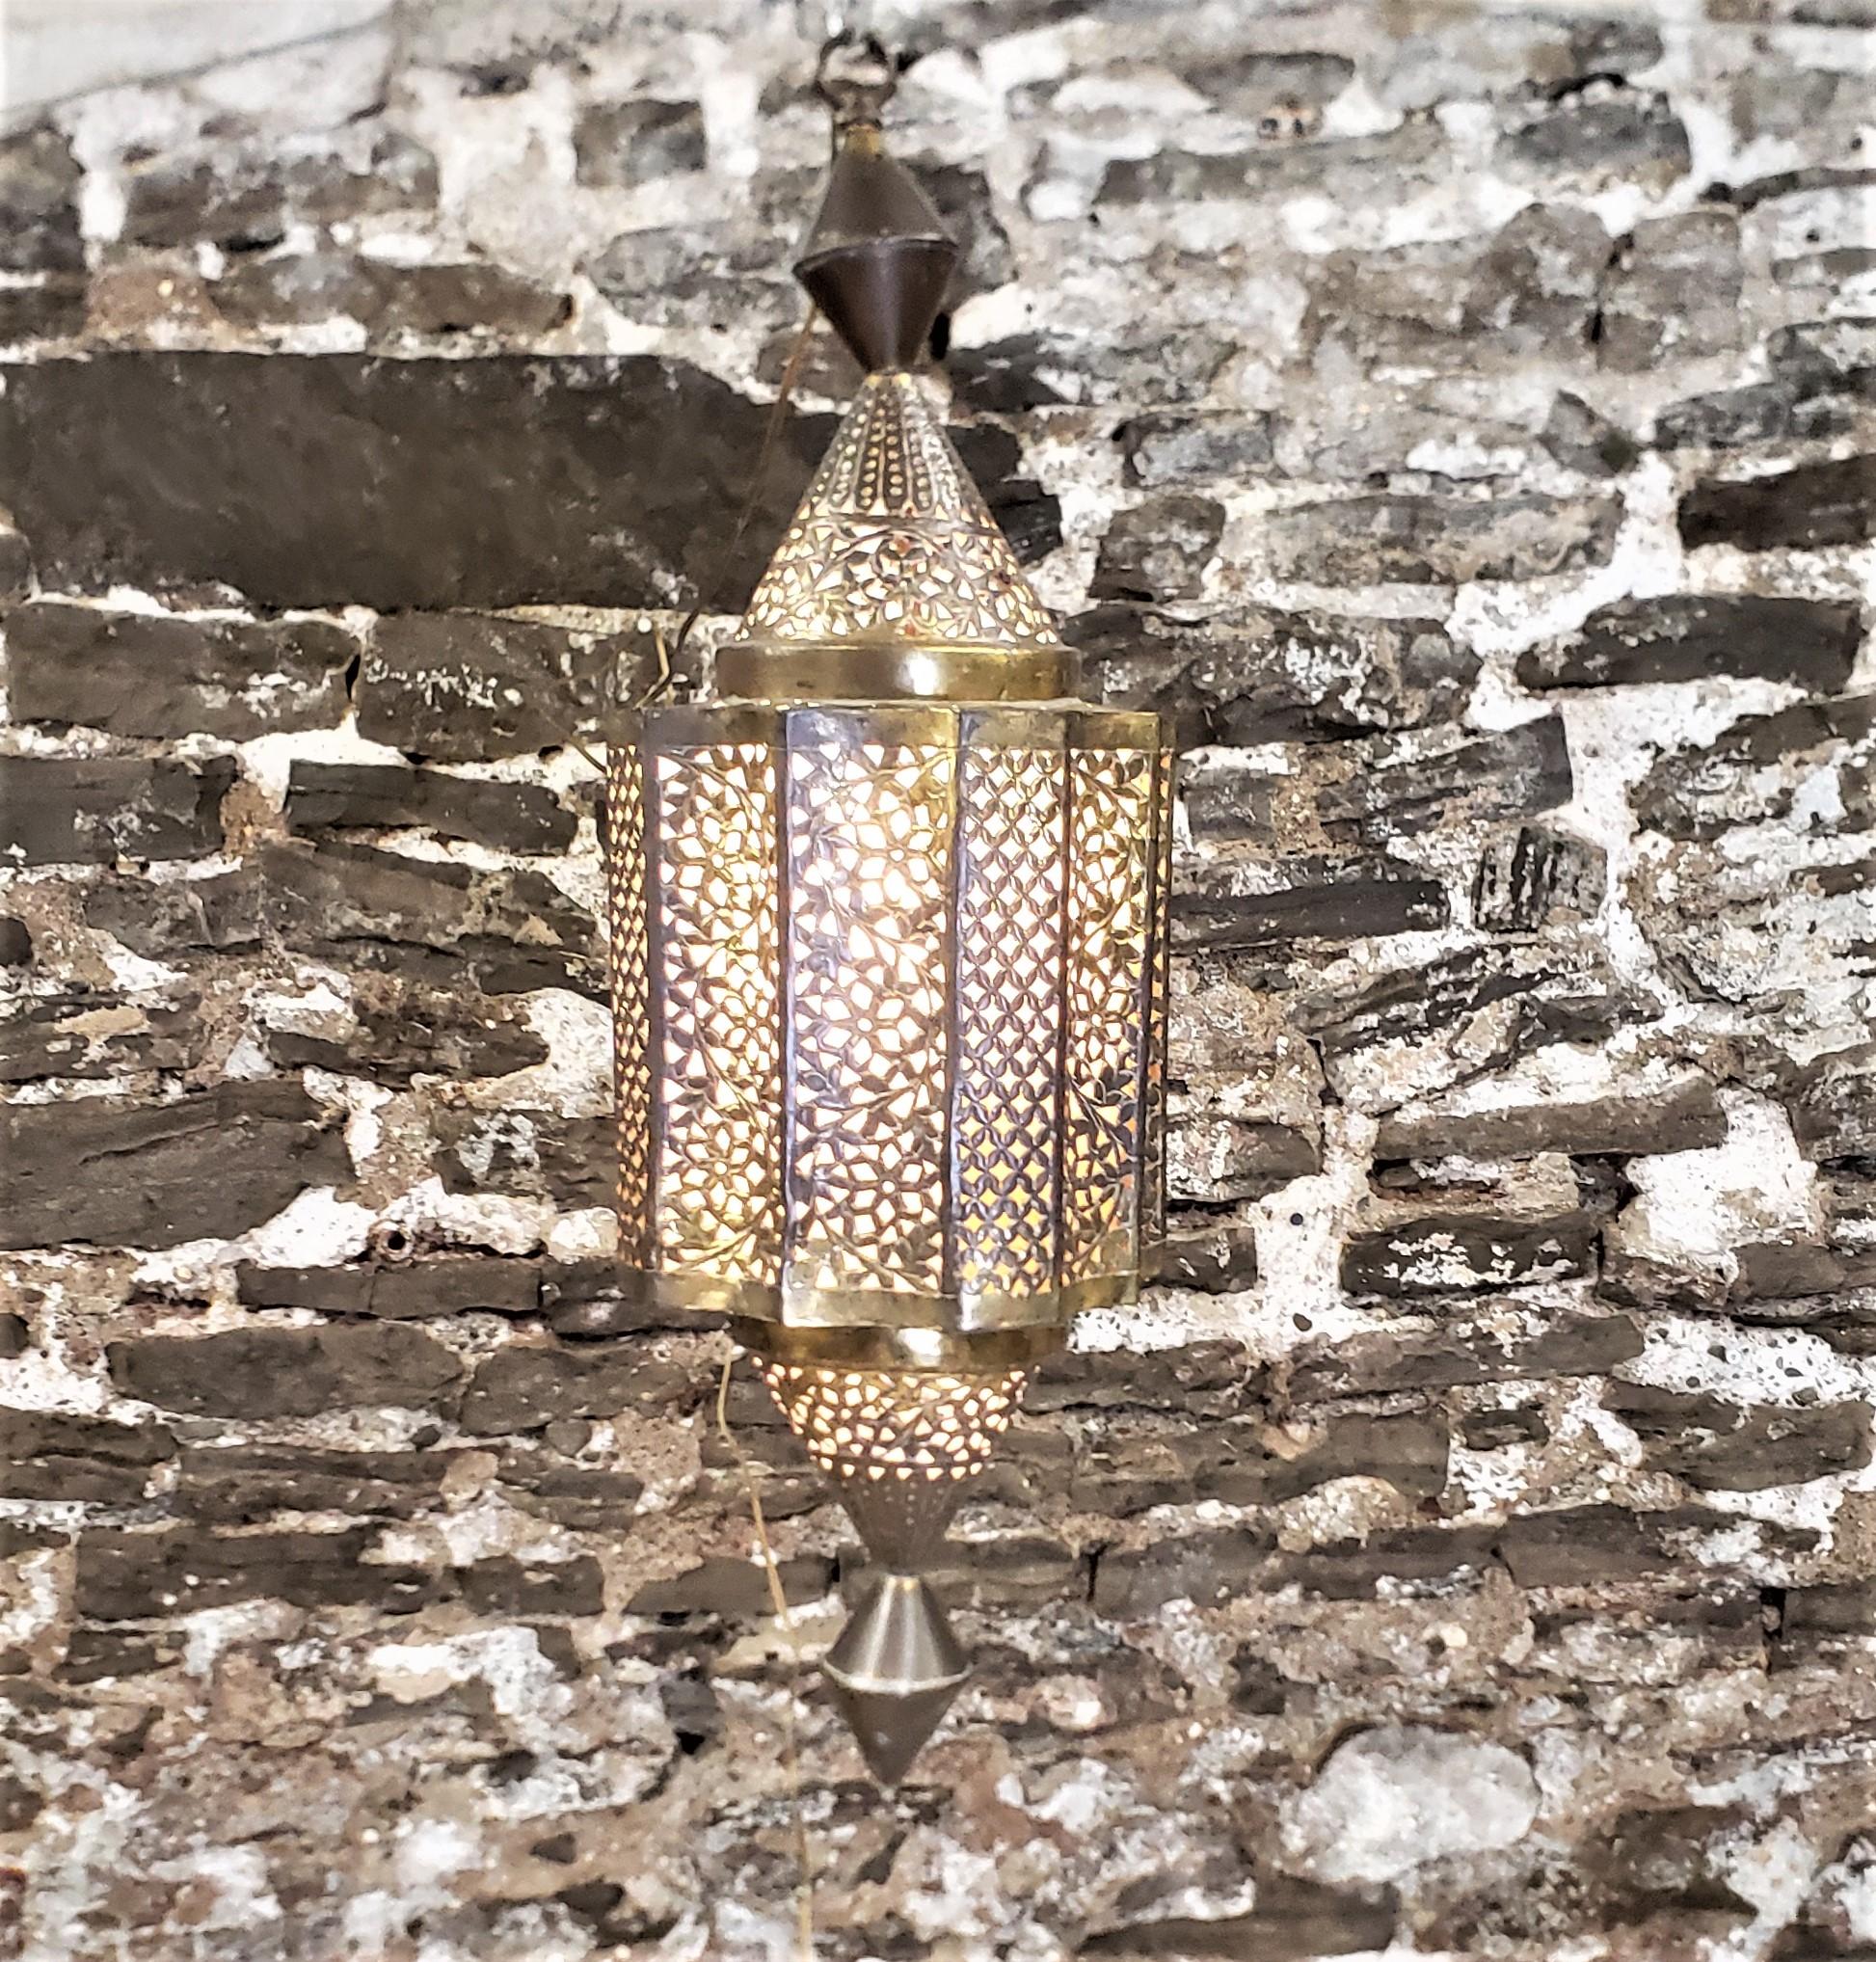 This lantern is swag lamp is unsigned, but originated from Morocco and dates to approximately 1965 and done in the period Mid-Century Modern style. The lantern is composed of brass sheeting which has been shaped and pierced with geometric designs.